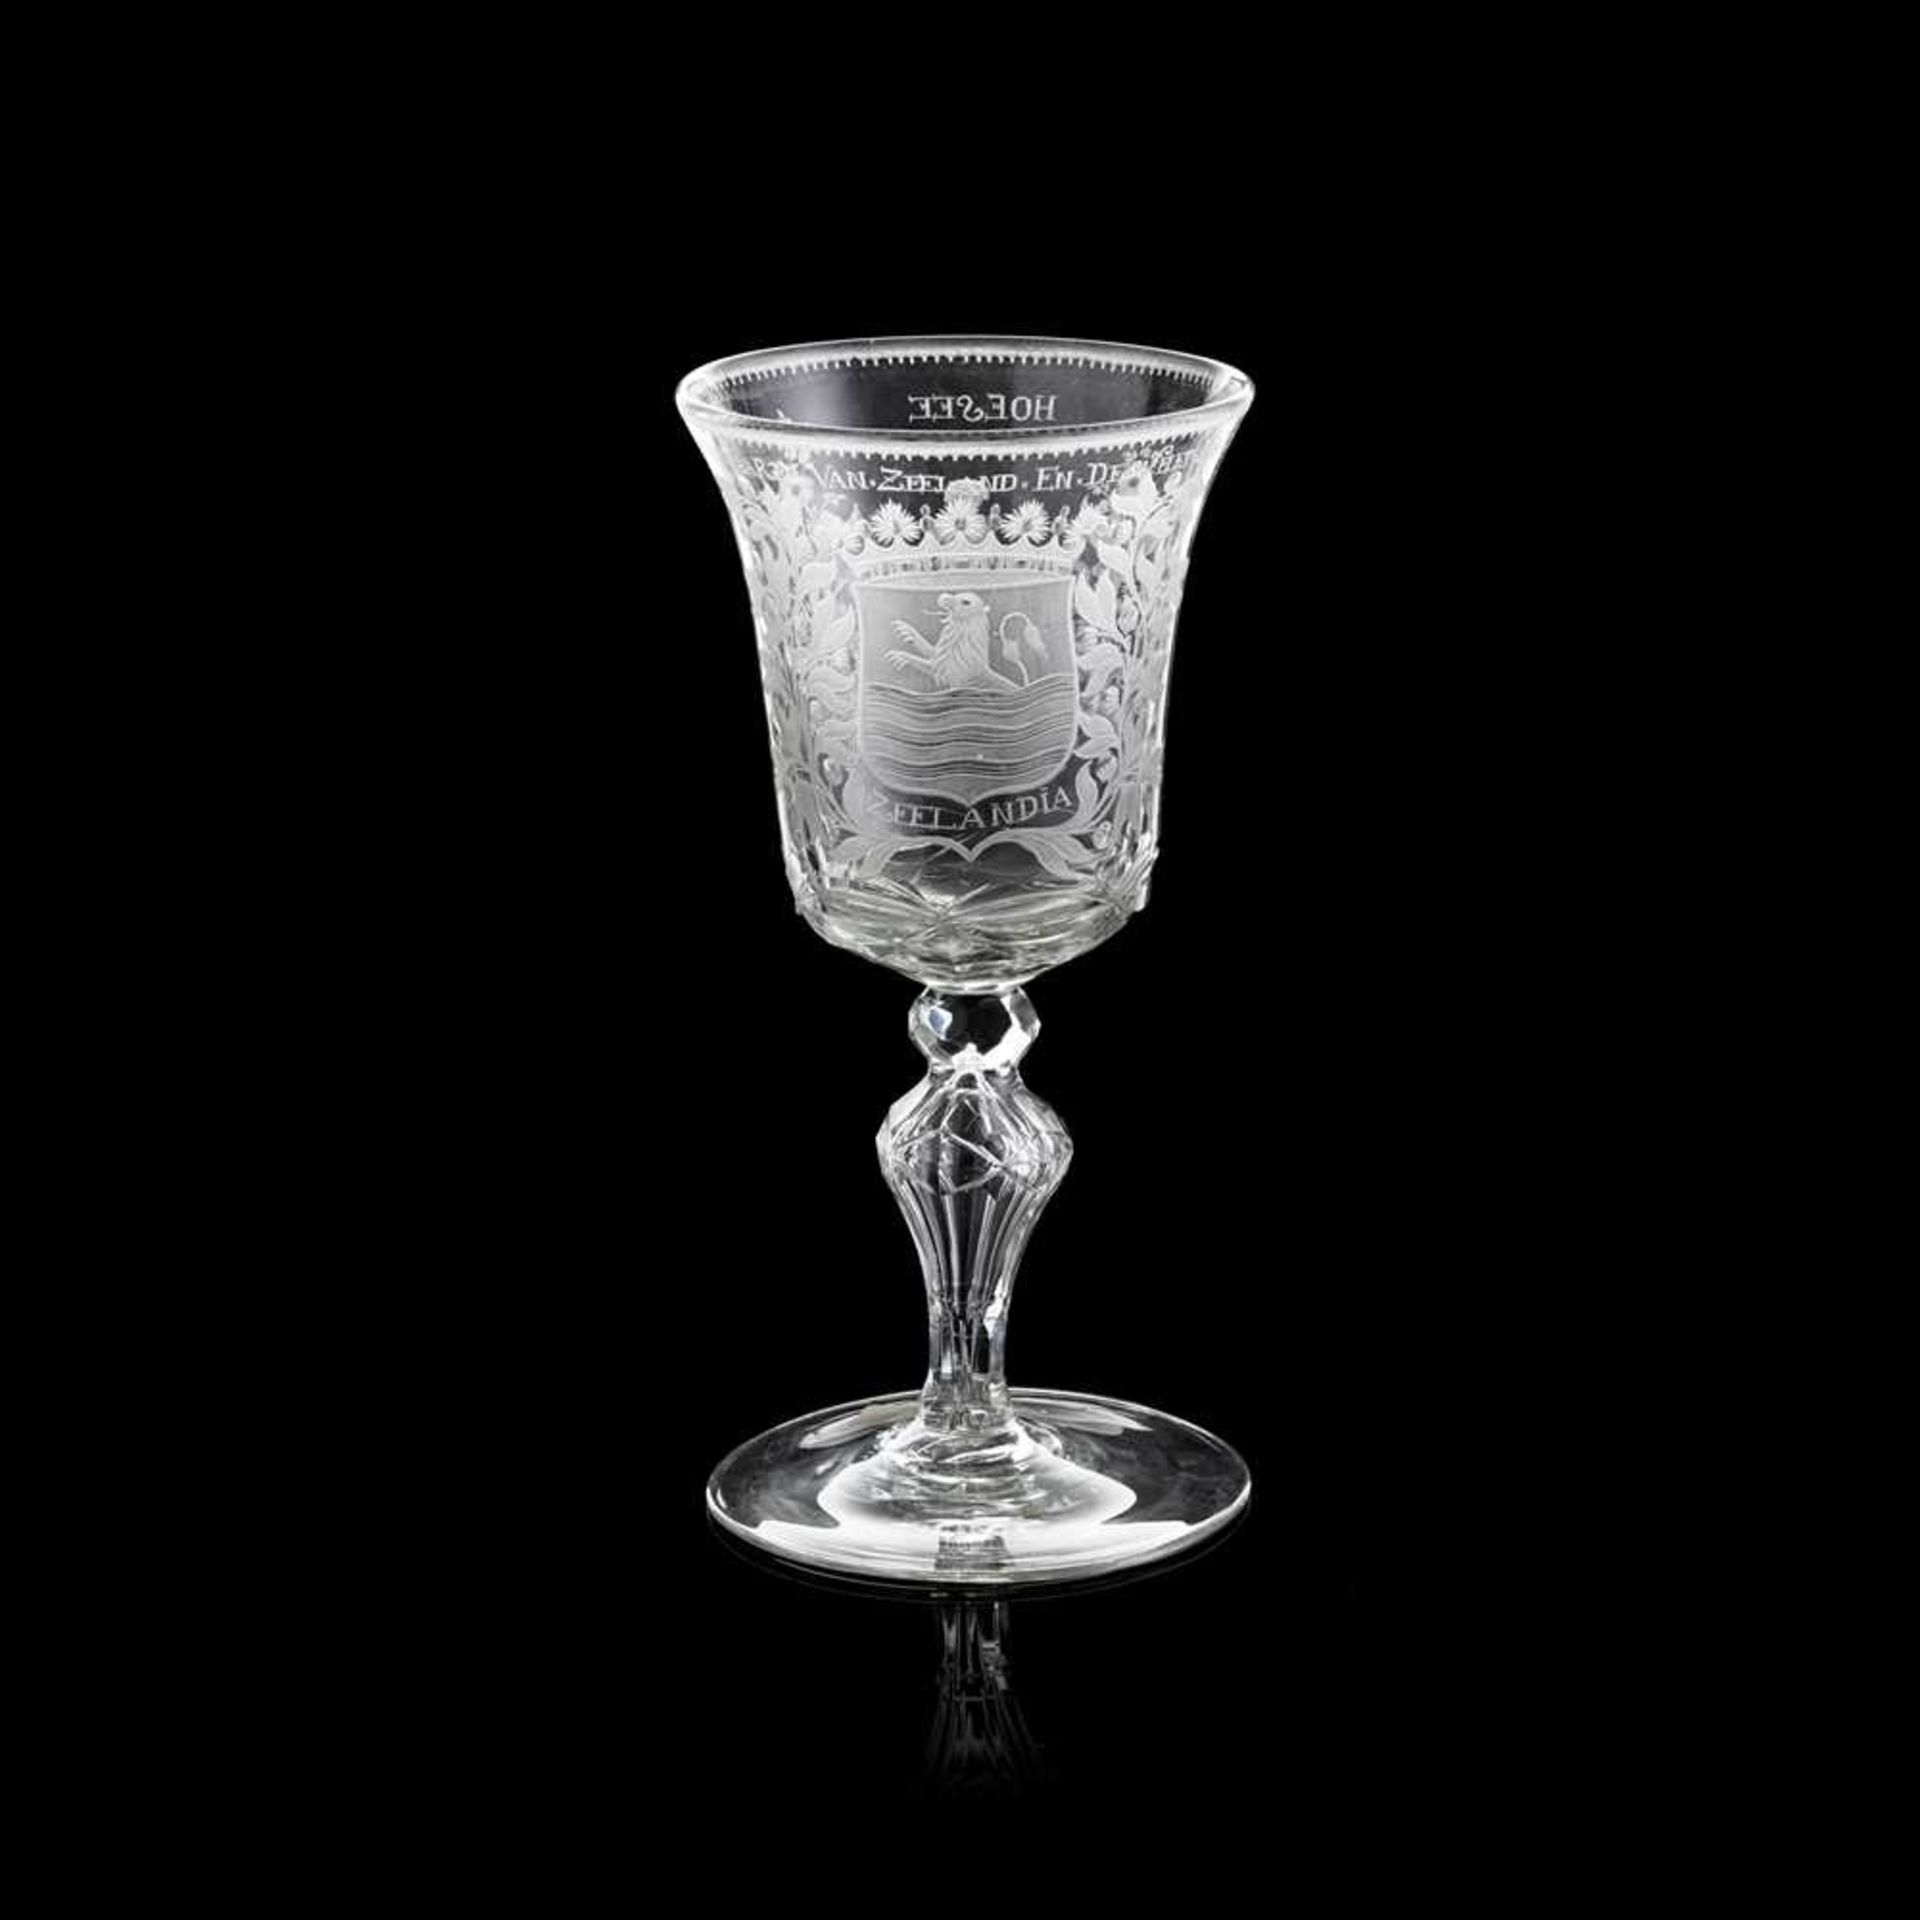 LARGE DUTCH GLASS GOBLET ENGRAVED WITH THE ZEELAND COAT OF ARMS MID 18TH CENTURY